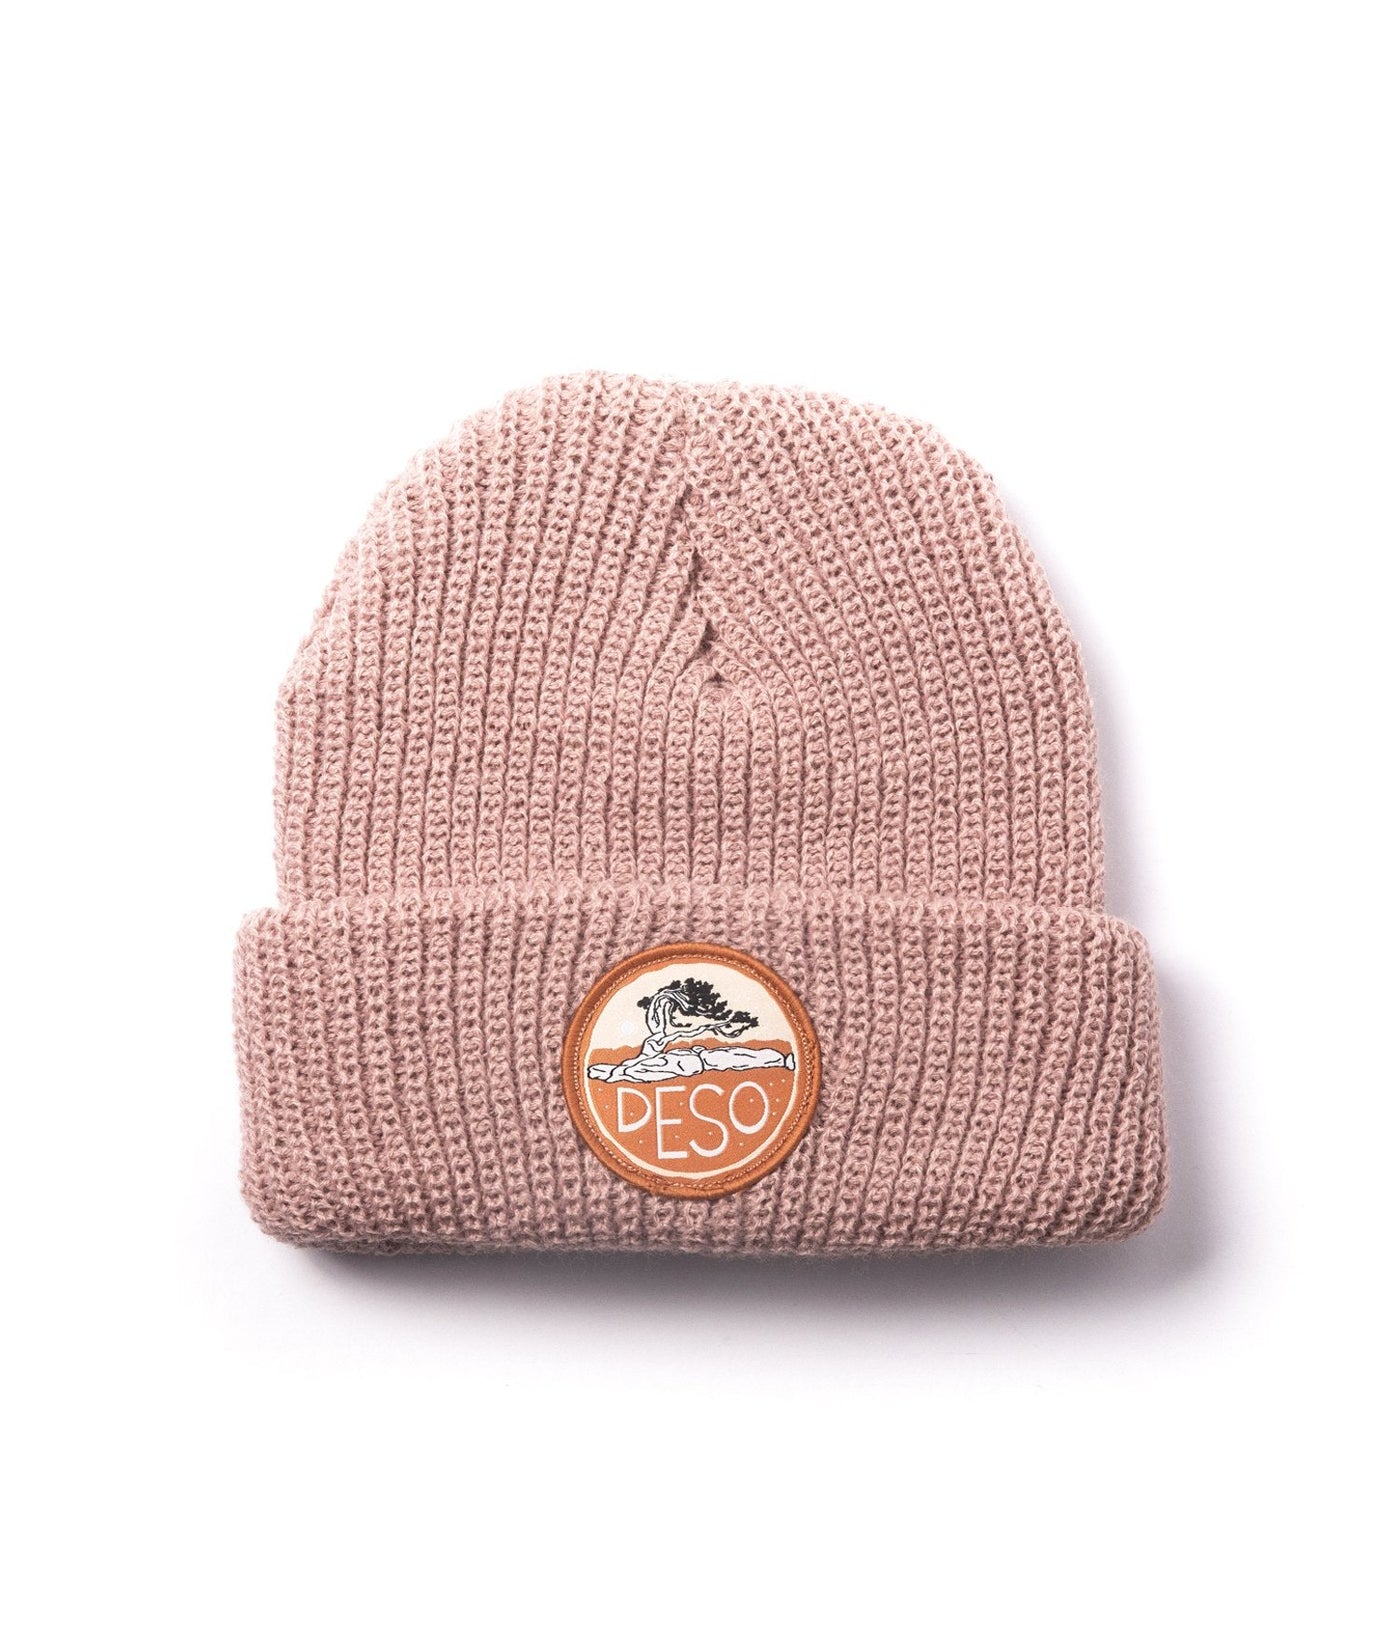 Bristlecone Heave Knit Cuff Beanie - Multiple Colors - The Lake and Company